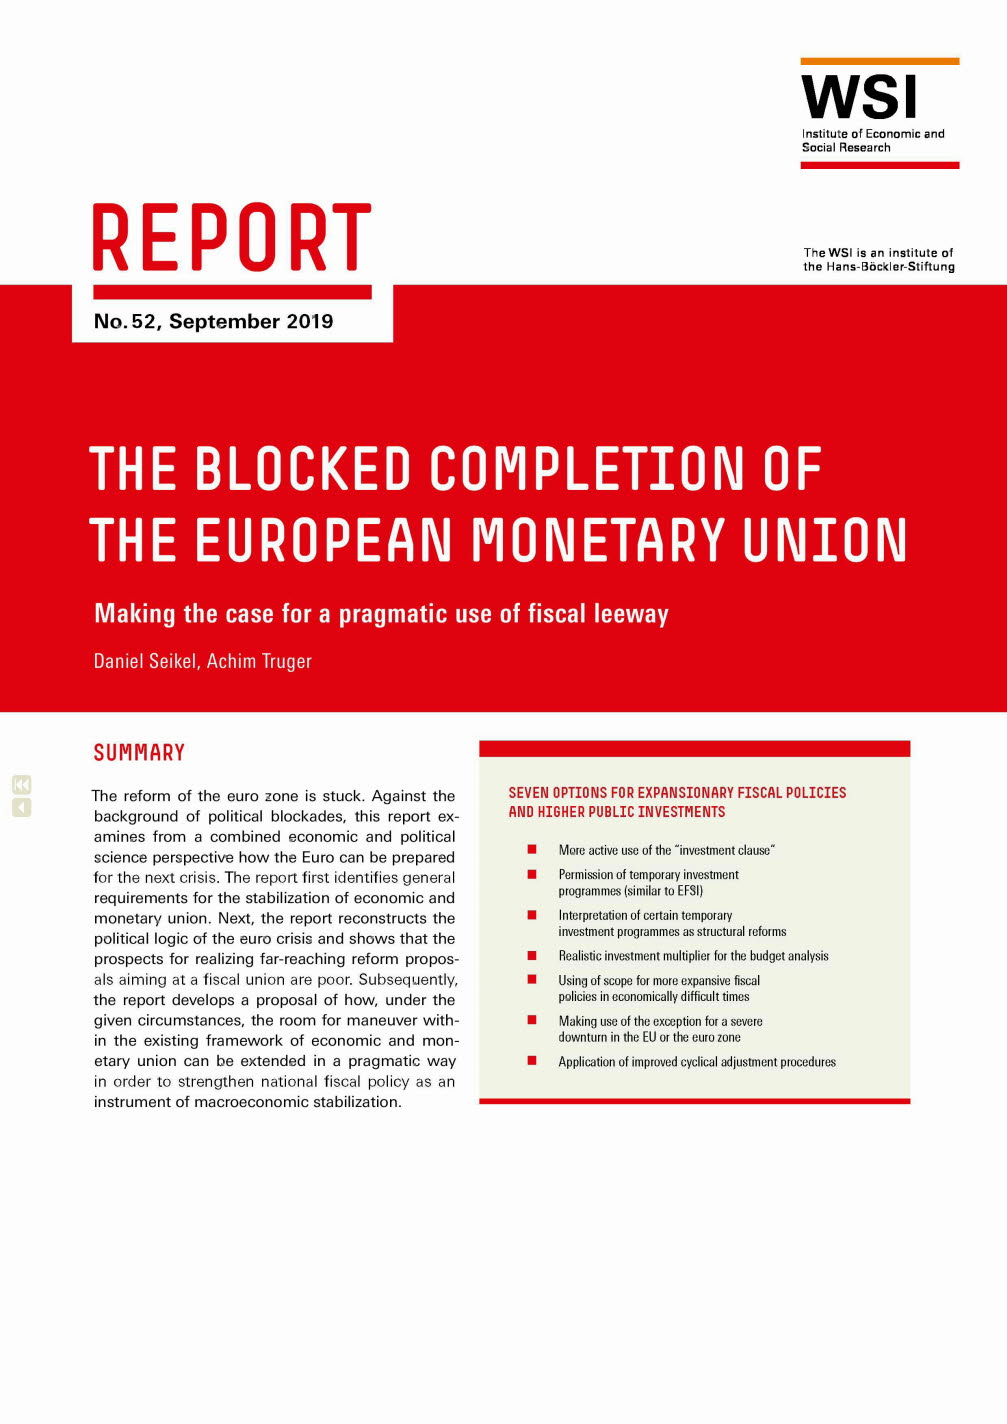 The blocked completion of the European Monetary Union